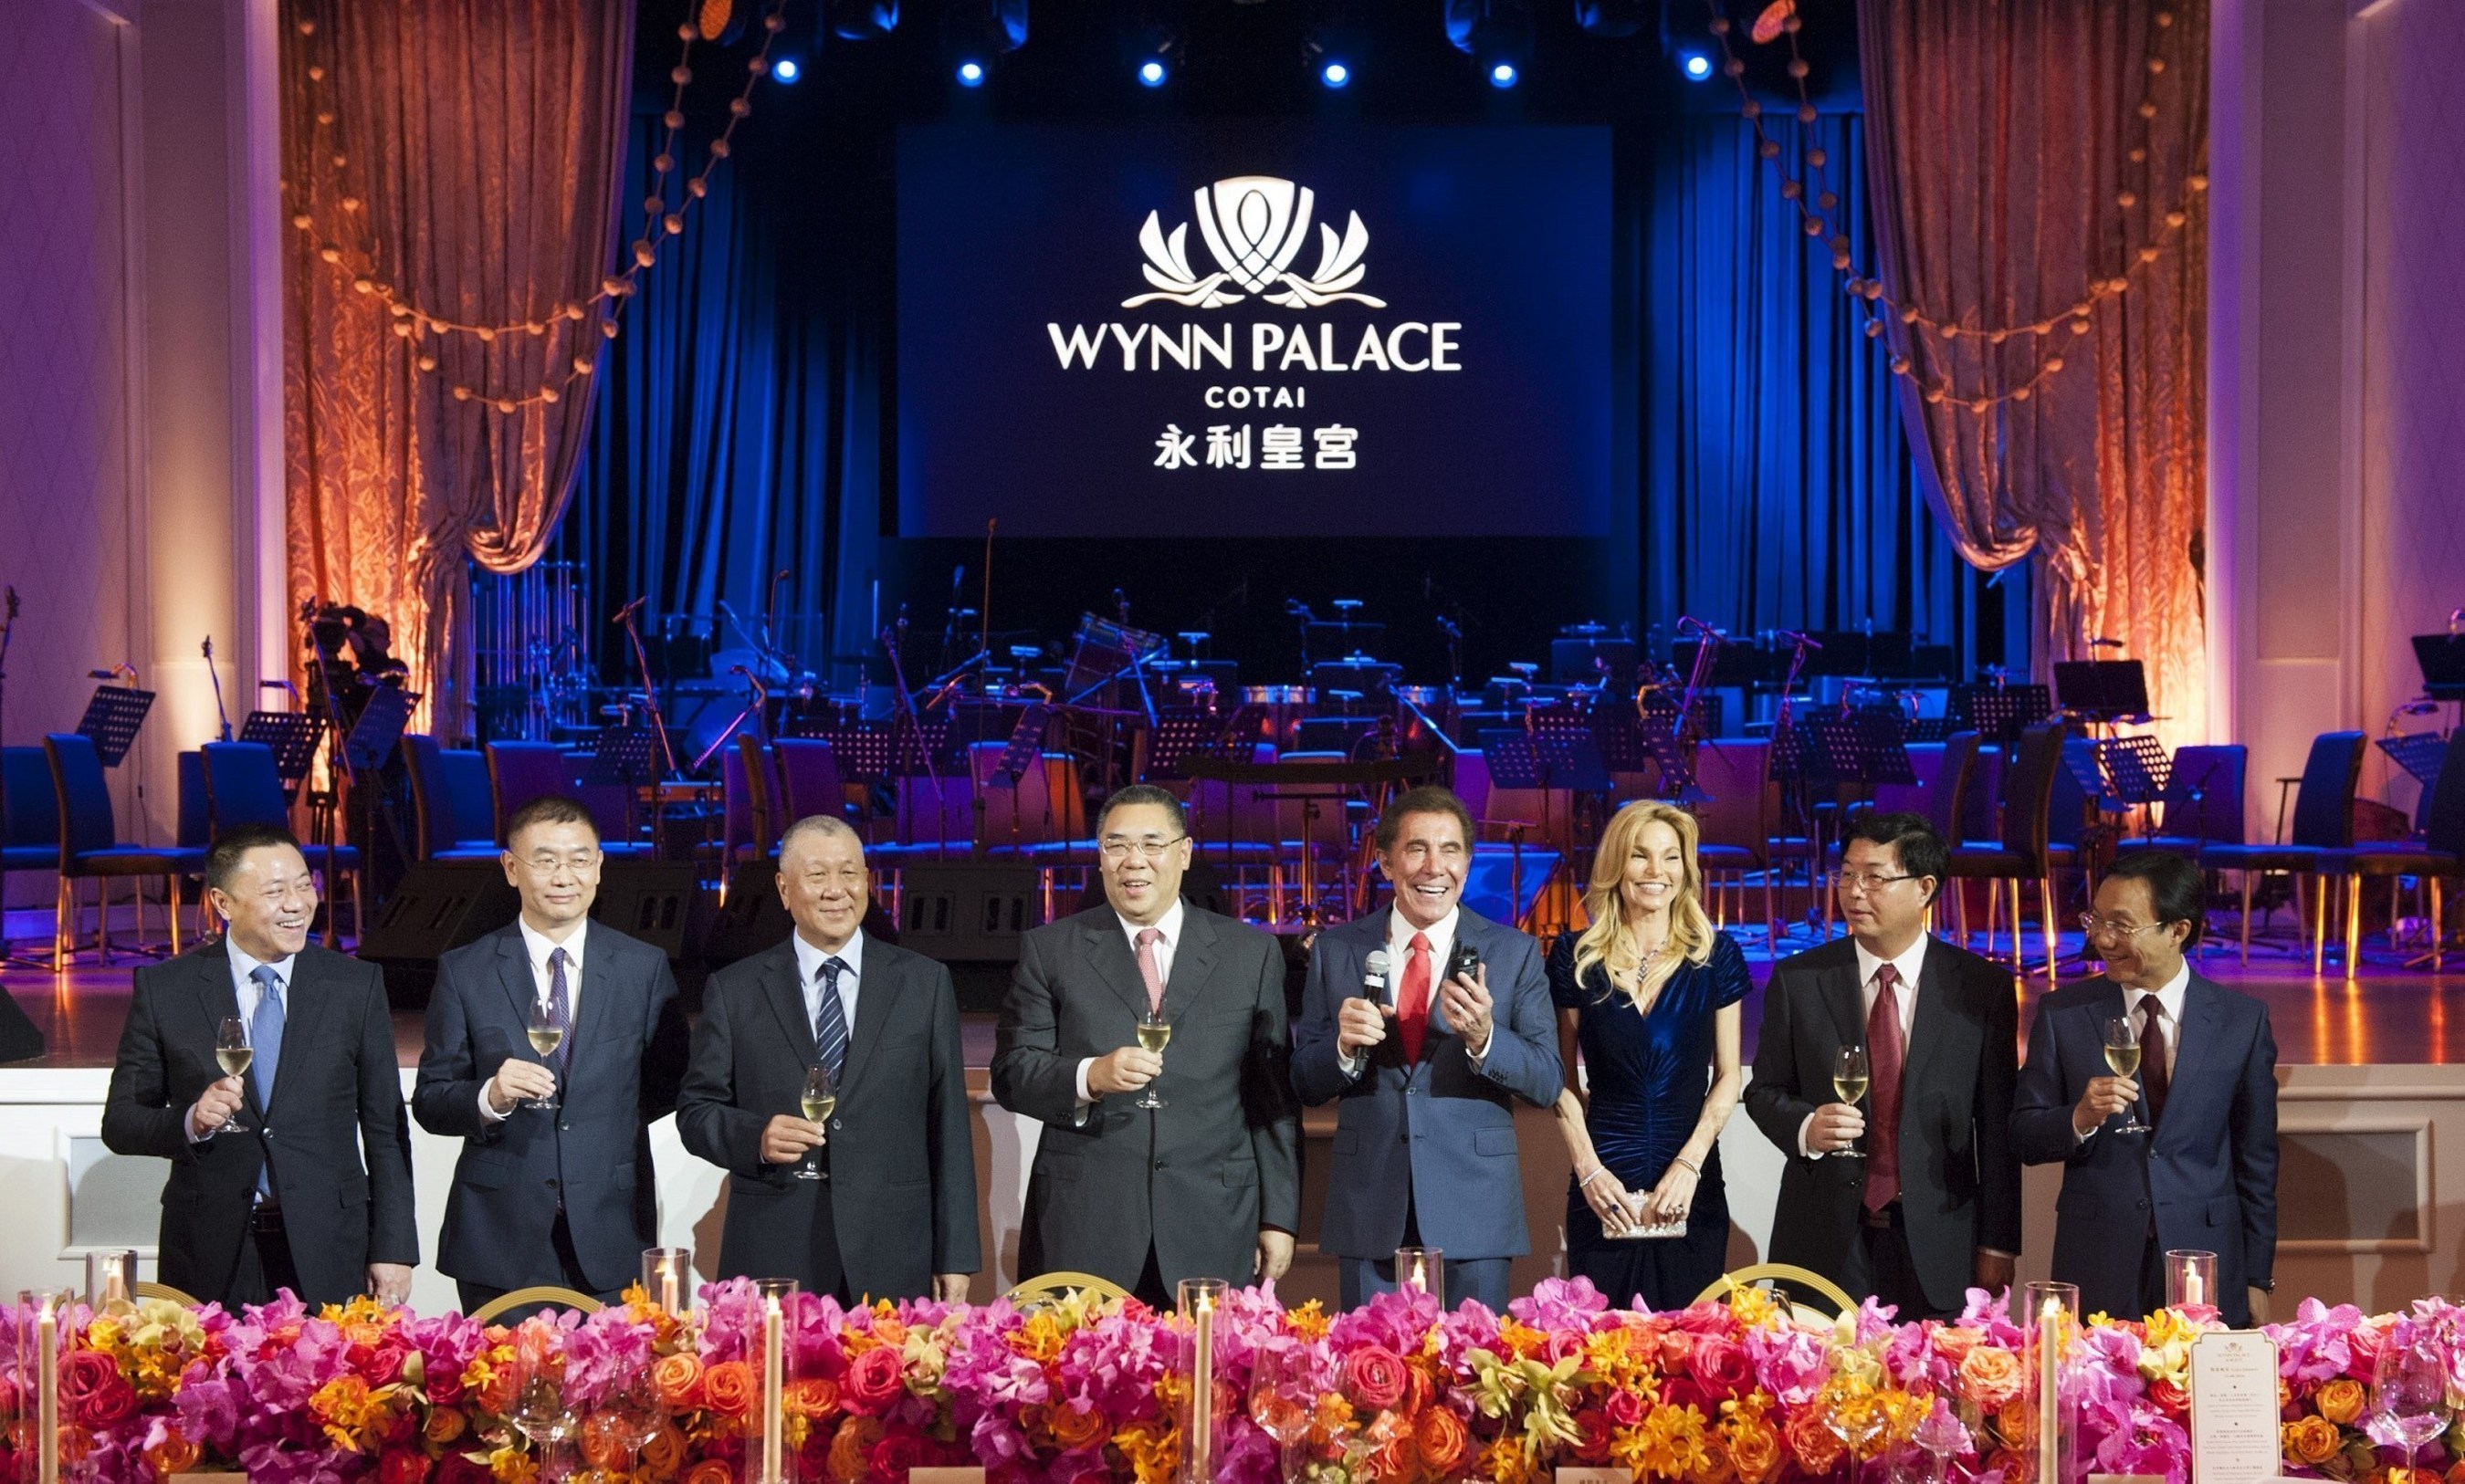 Officiating guests raise a toast at the opening of Wynn Palace.